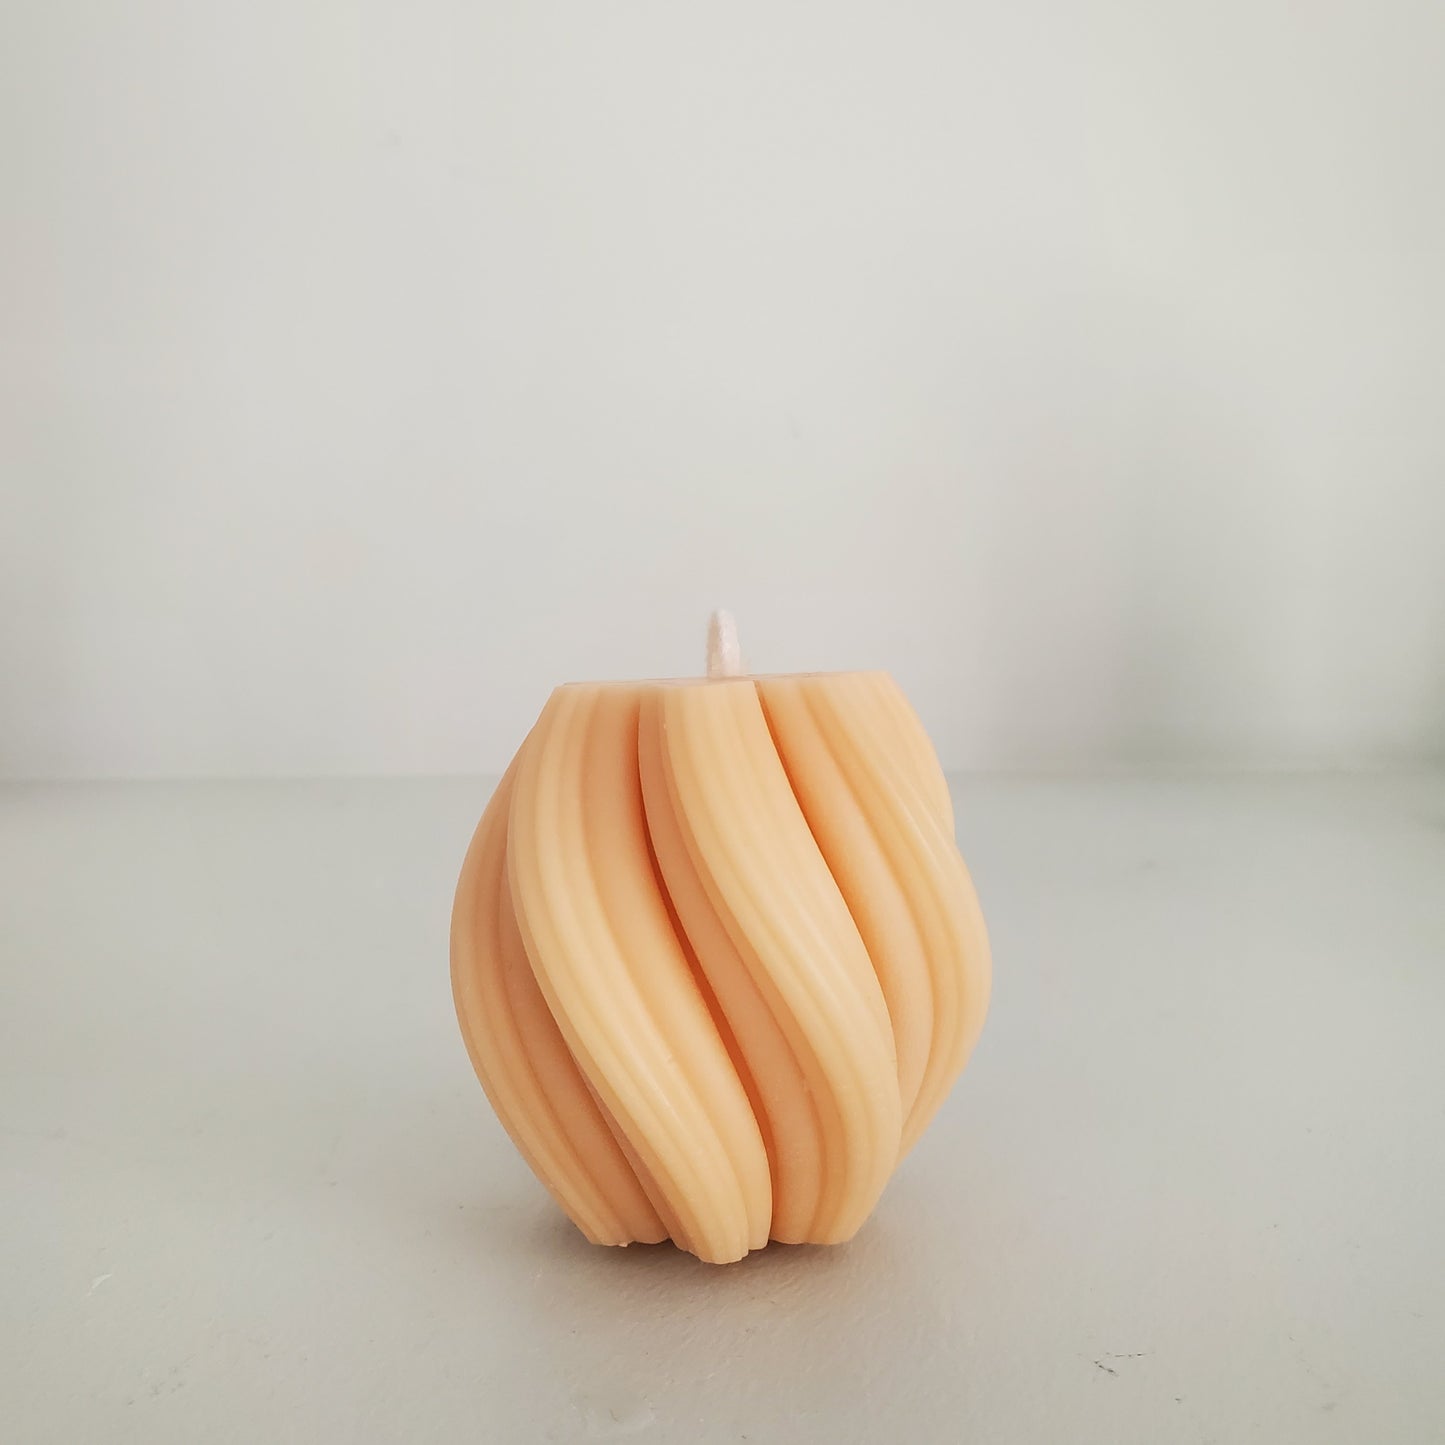 Small swirl candle